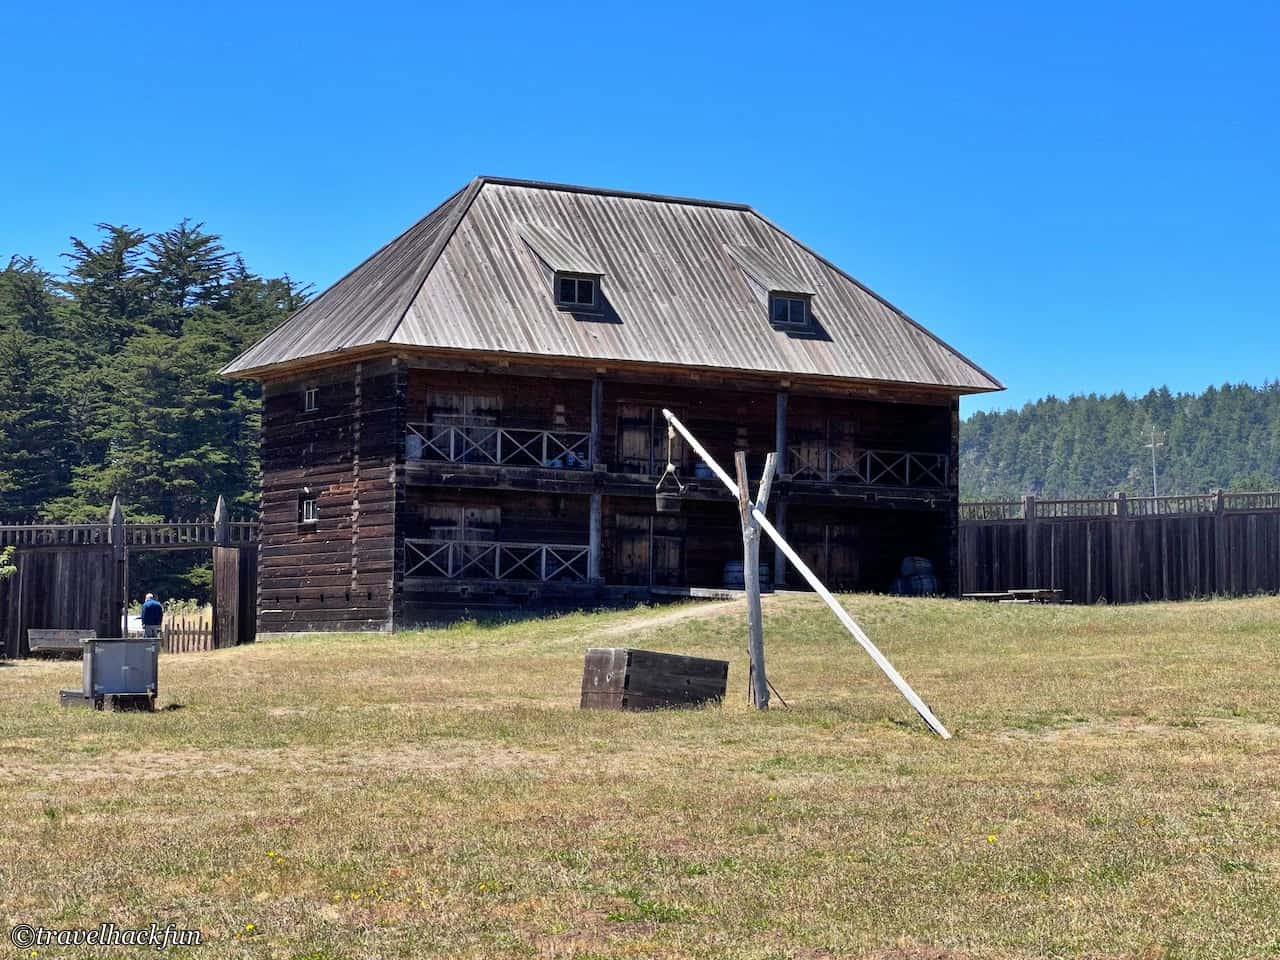 Fort Ross,俄羅斯堡,fort ross state park,fort ross state historic park,fort ross california 38